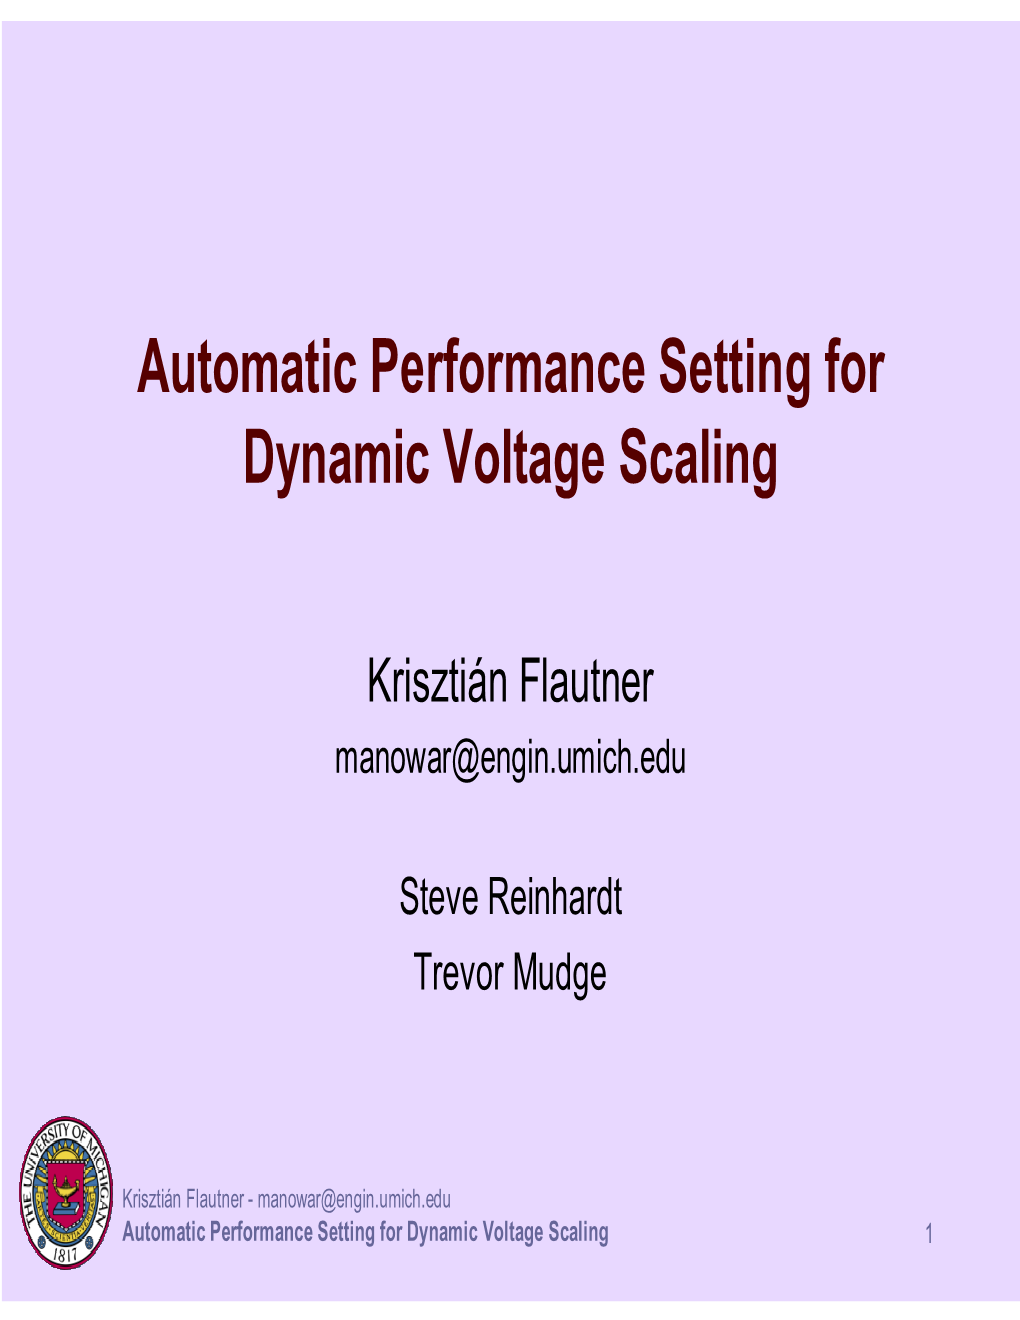 Automatic Performance Setting for Dynamic Voltage Scaling